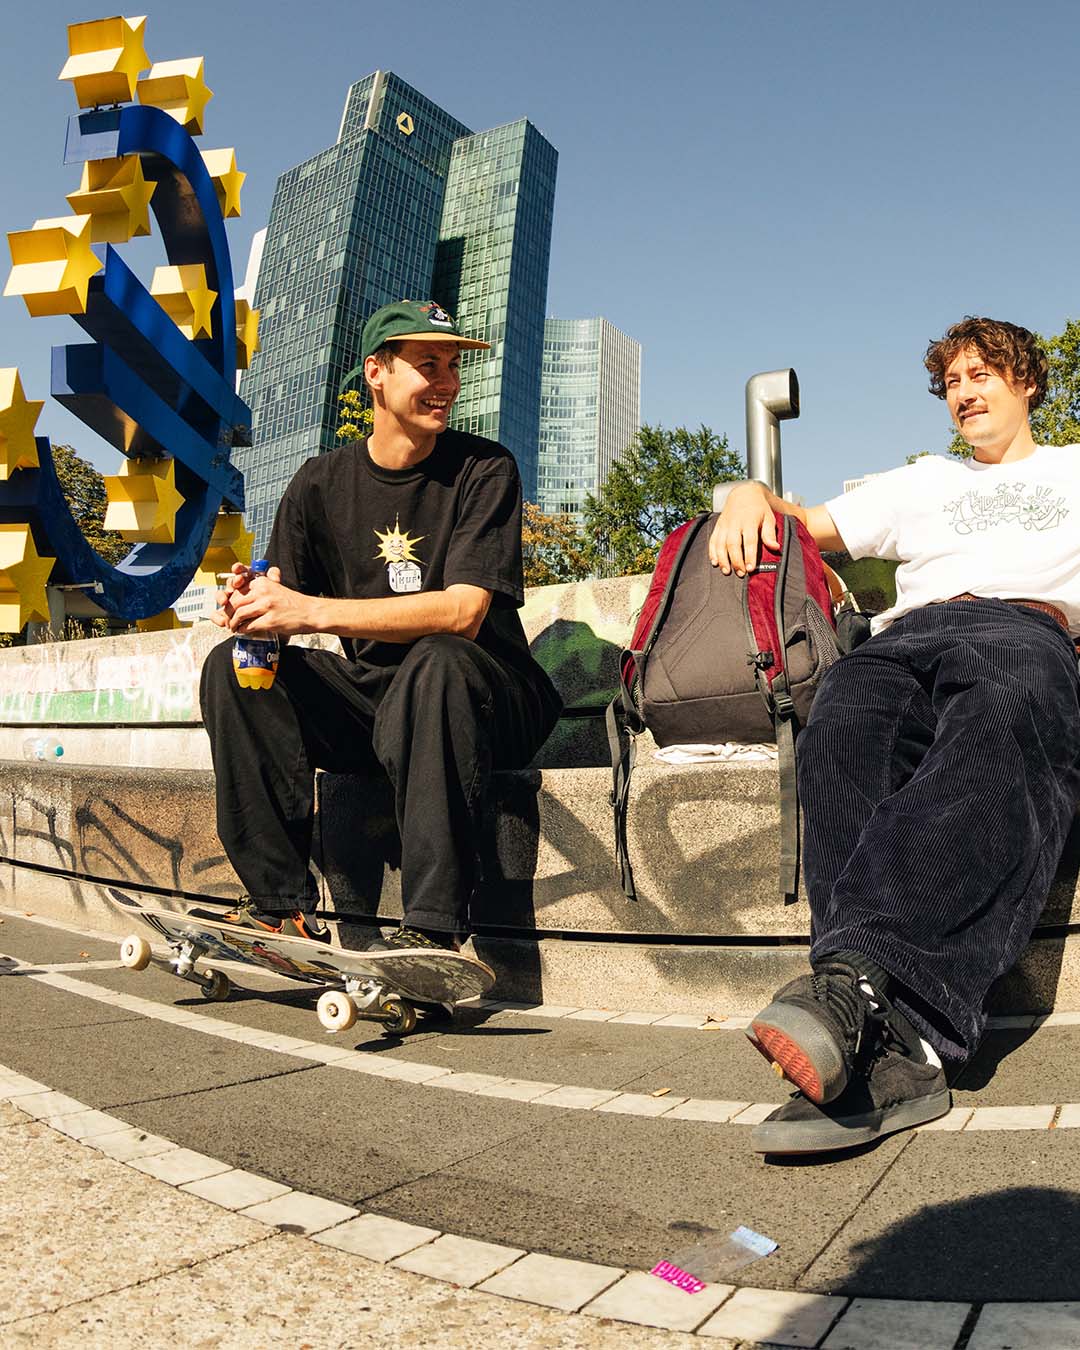 Two young skateboarders sitting in the front of skyscrapers, having a chat and laughing in the sun.